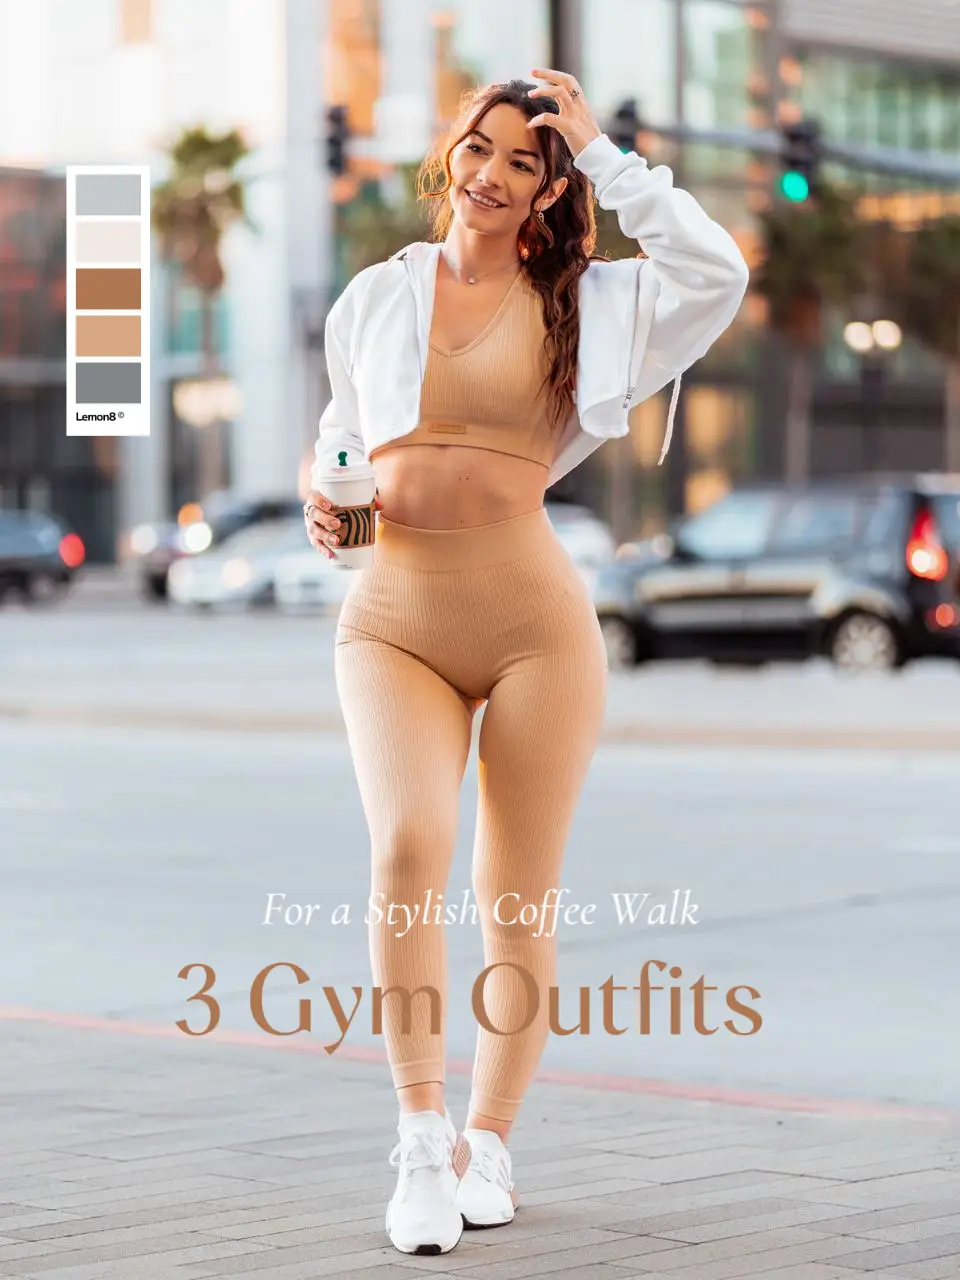 3 Gym Outfits for a stylish coffee walk